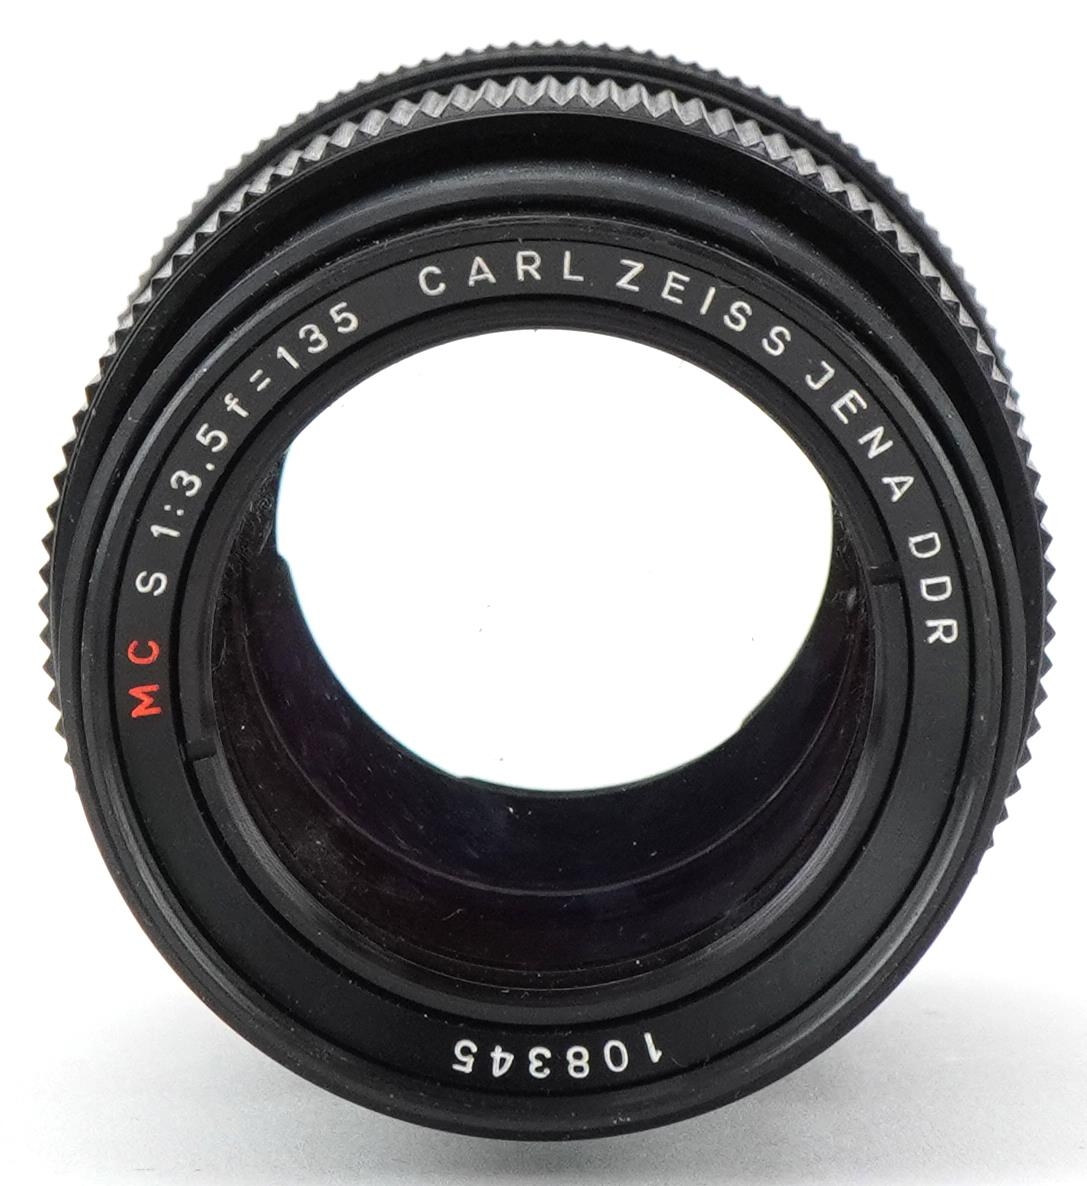 Carl Zeiss Jena DDR S 1:3.5F = 135 camera lens - Image 2 of 3